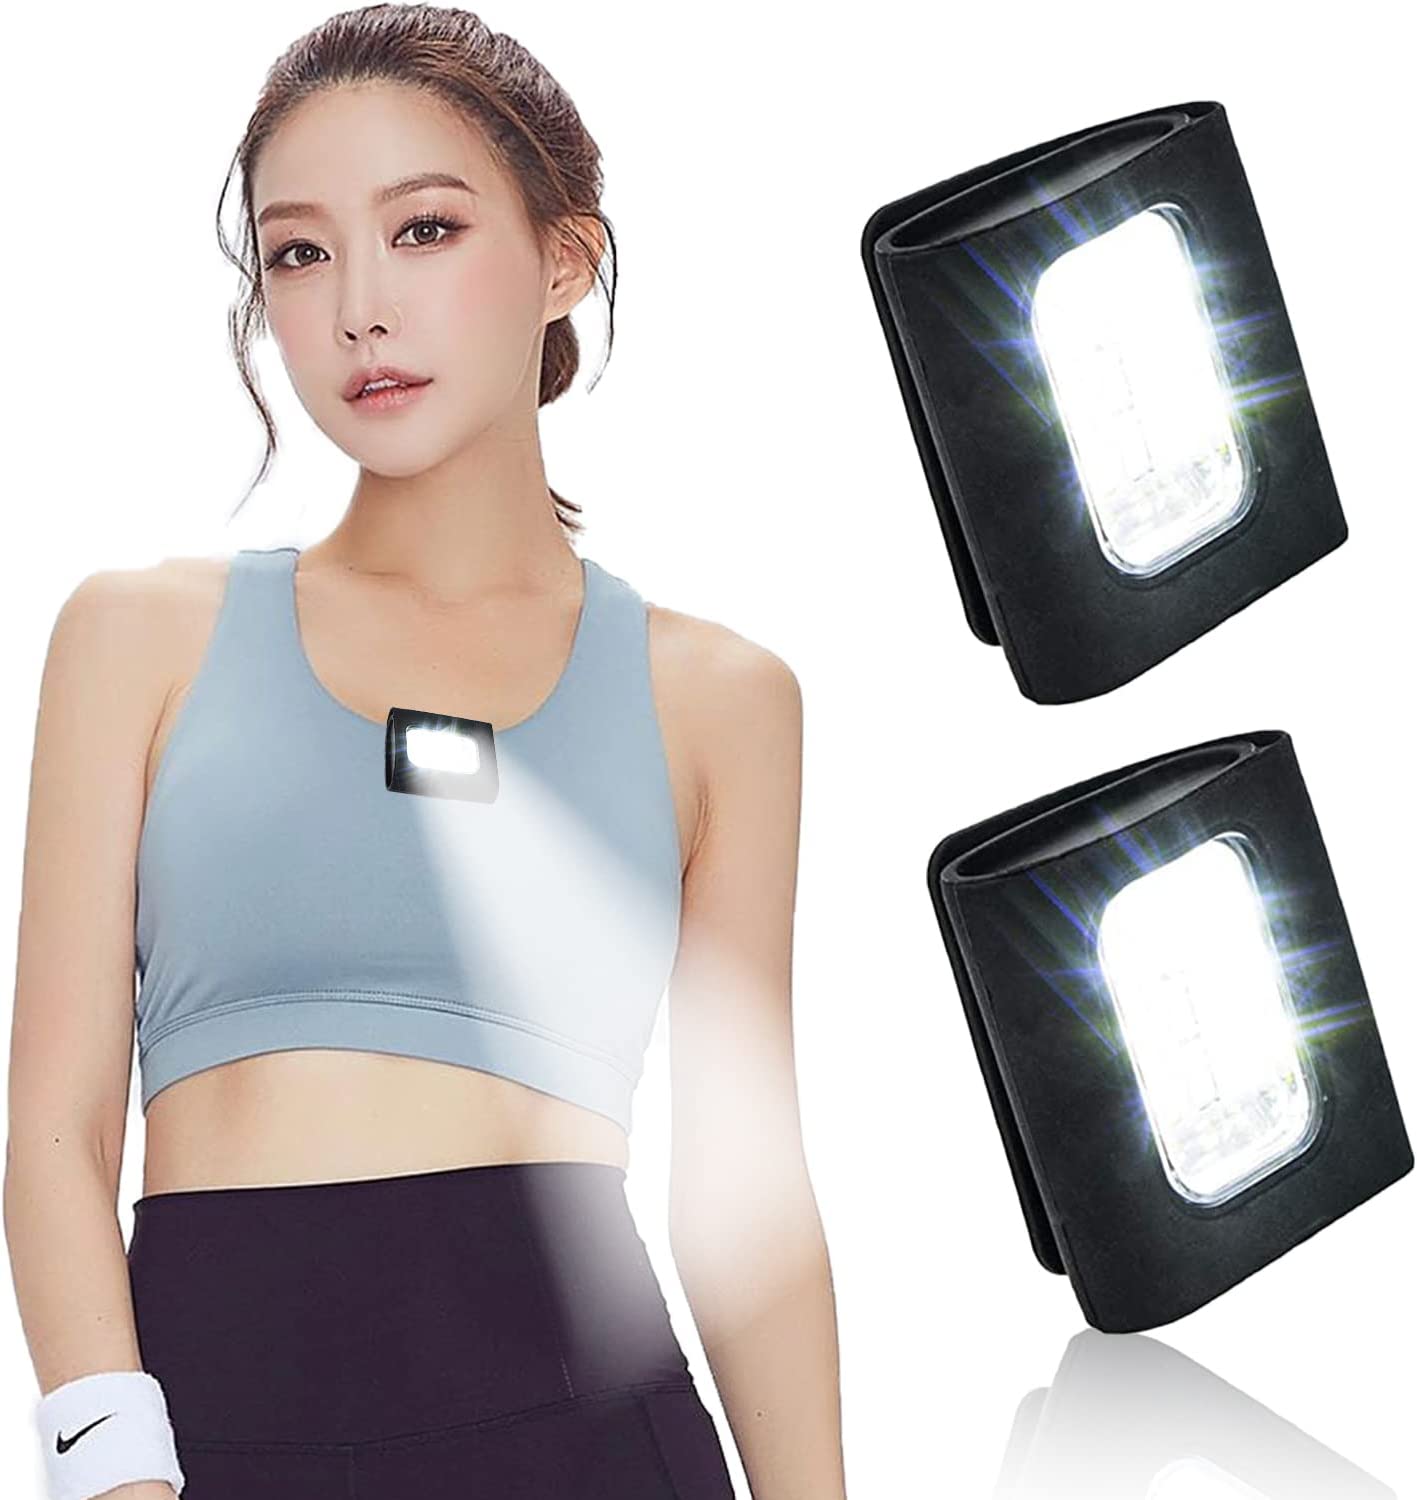  RODH Running Light for Runners, Jogging Safety Chest Lights  for Night Walking Running Reflector Gear Wearable Super Bright, USB  Rechargeable Battery with Adjustable Strap : Sports & Outdoors